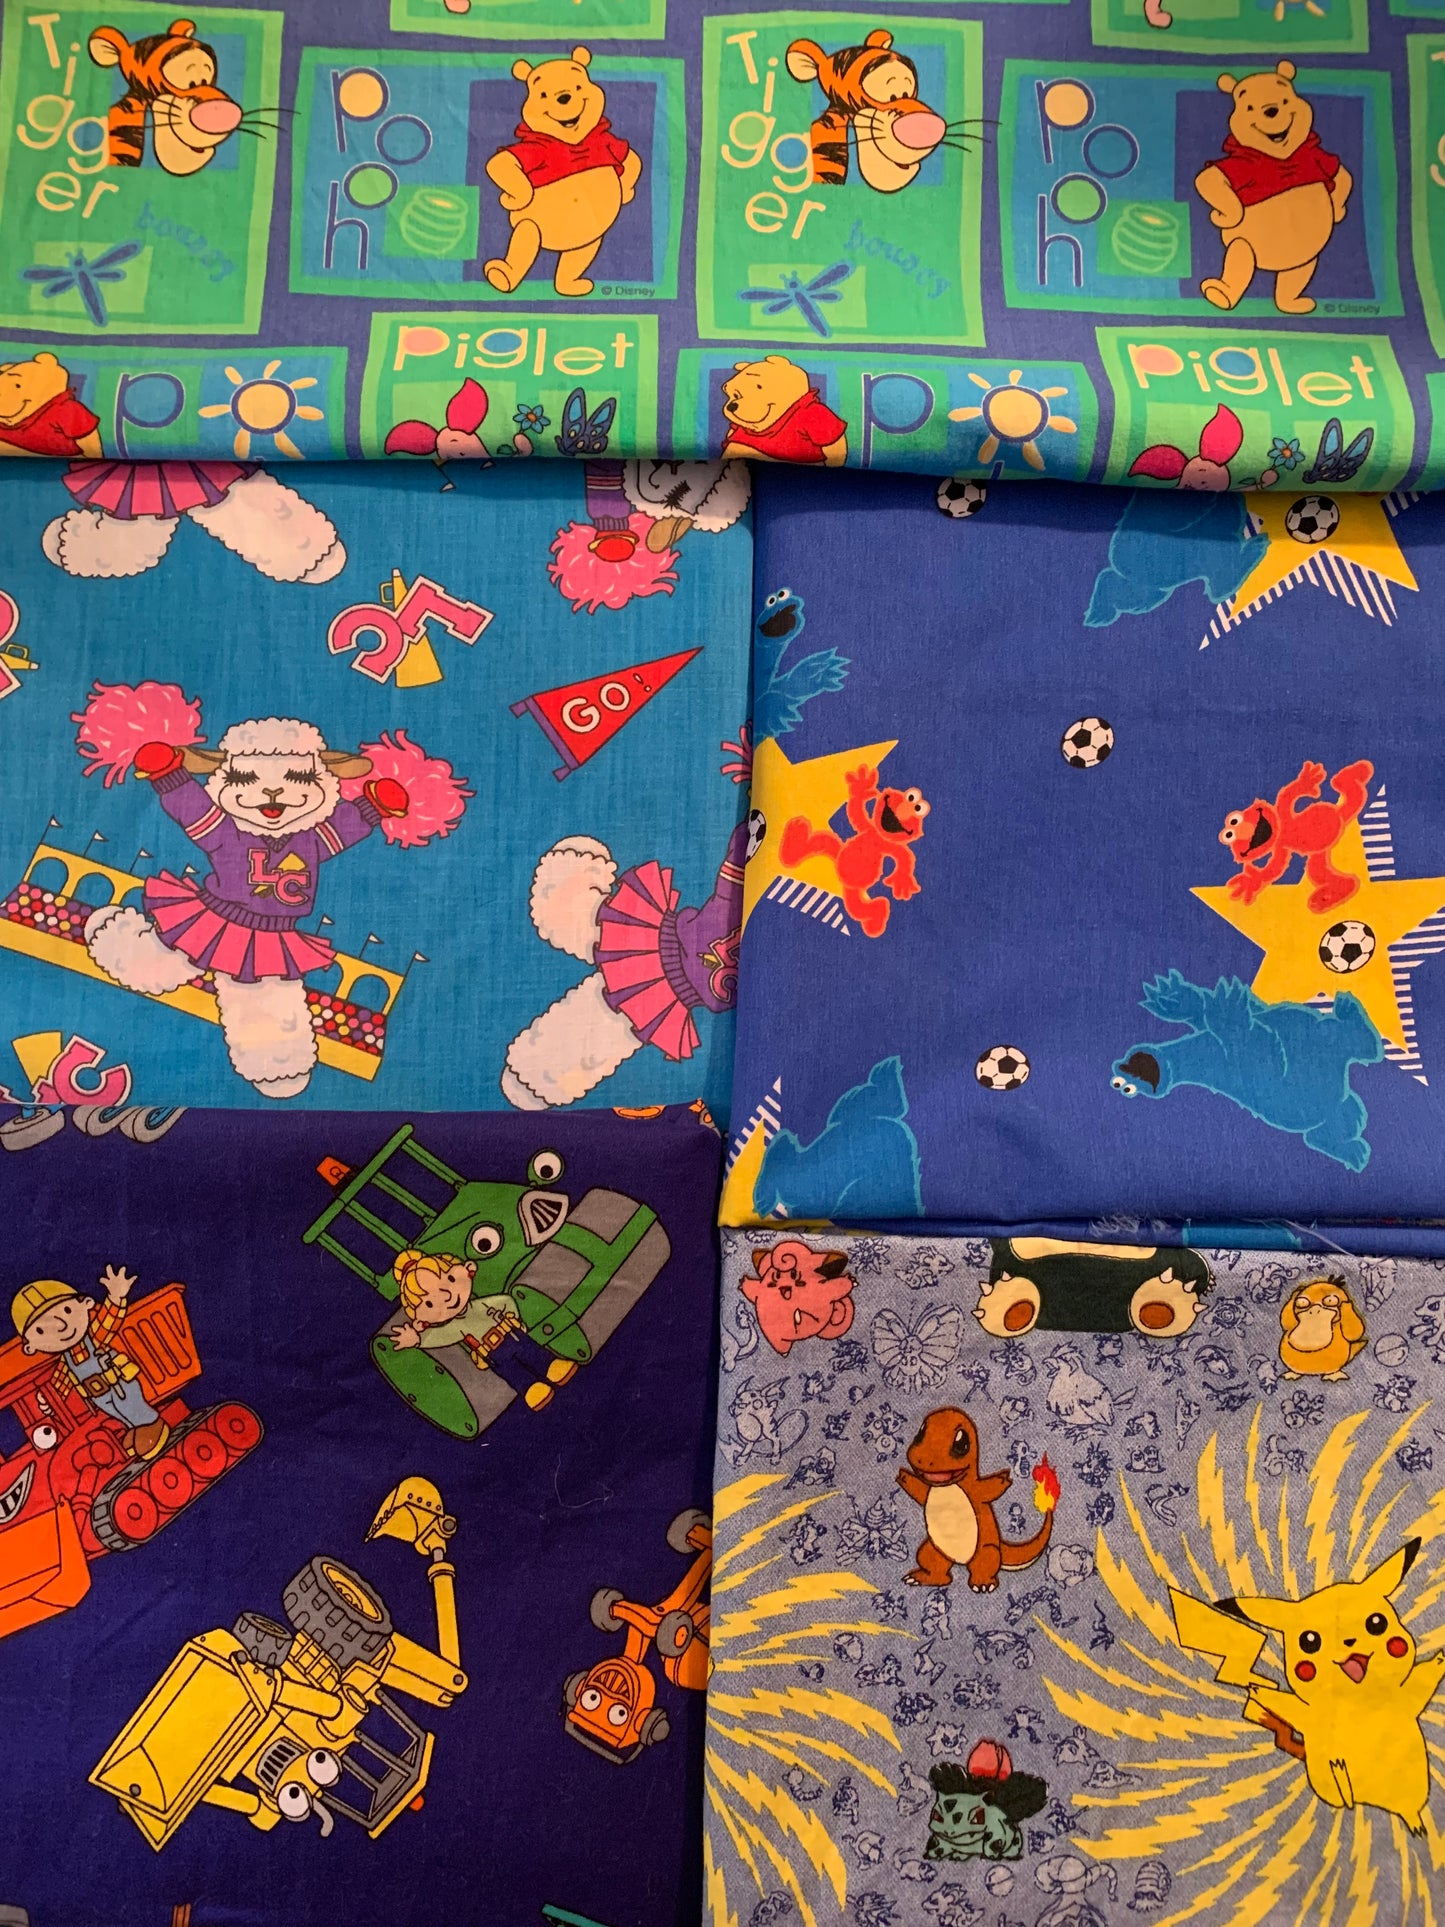 Custom double sided blanket, lap or twin, choose your pattern or characters, Cotton top, flannel bottom, washable, kids, adults, washable